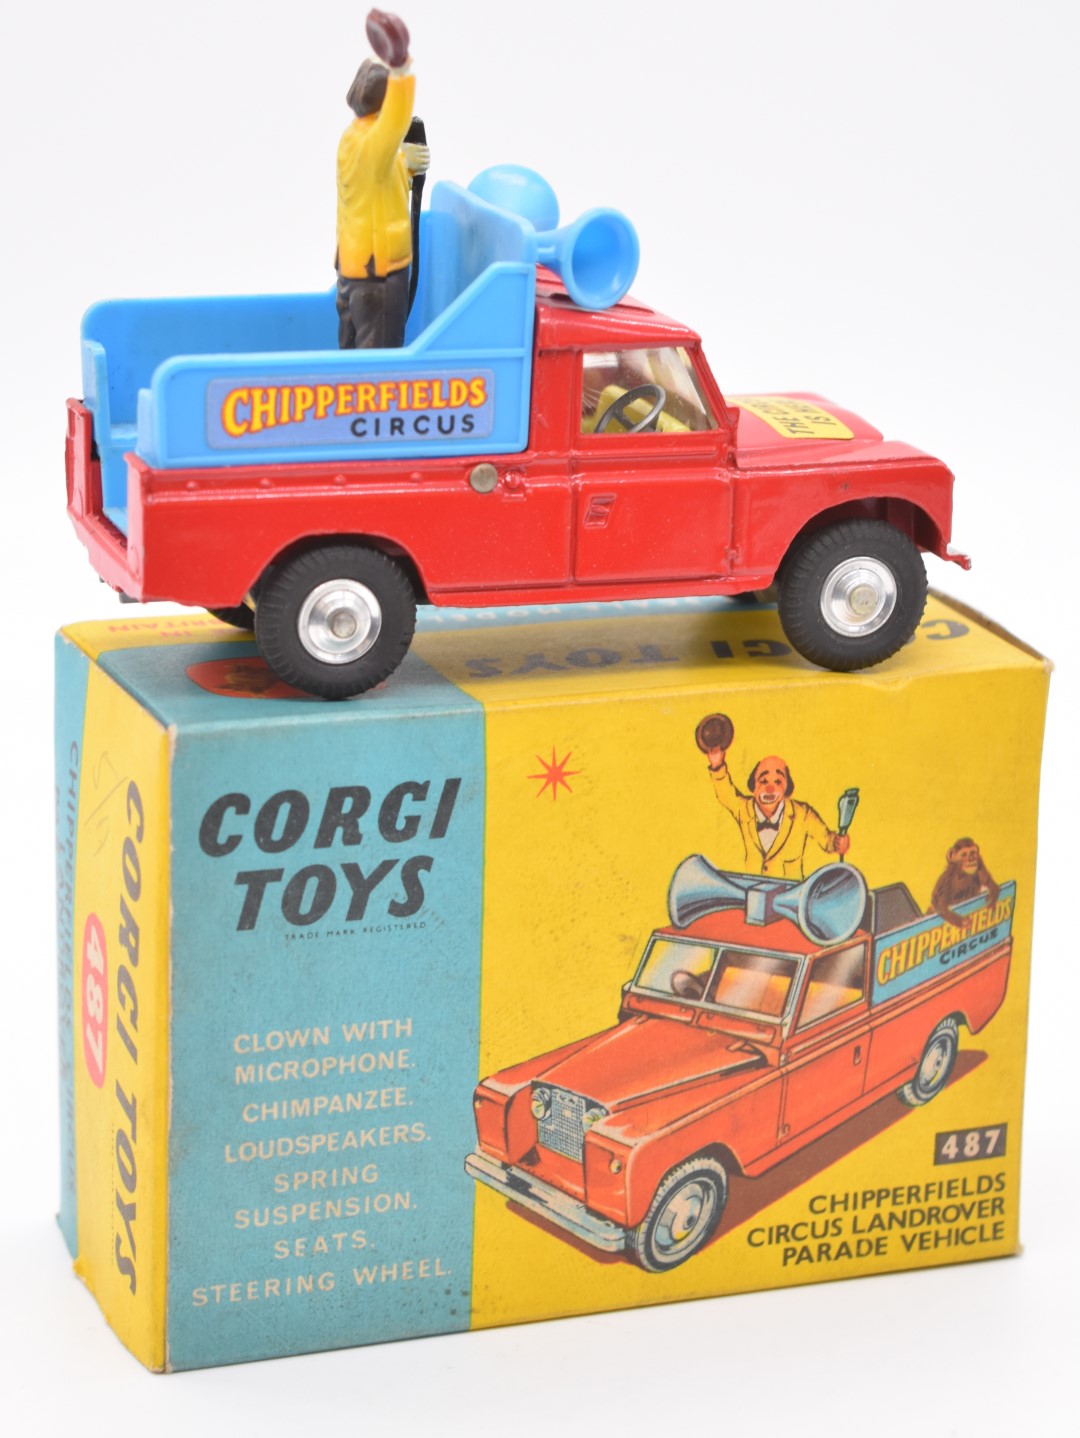 Corgi Toys diecast model Chipperfields Circus Landrover Parade Vehicle with red body, lemon - Image 3 of 4